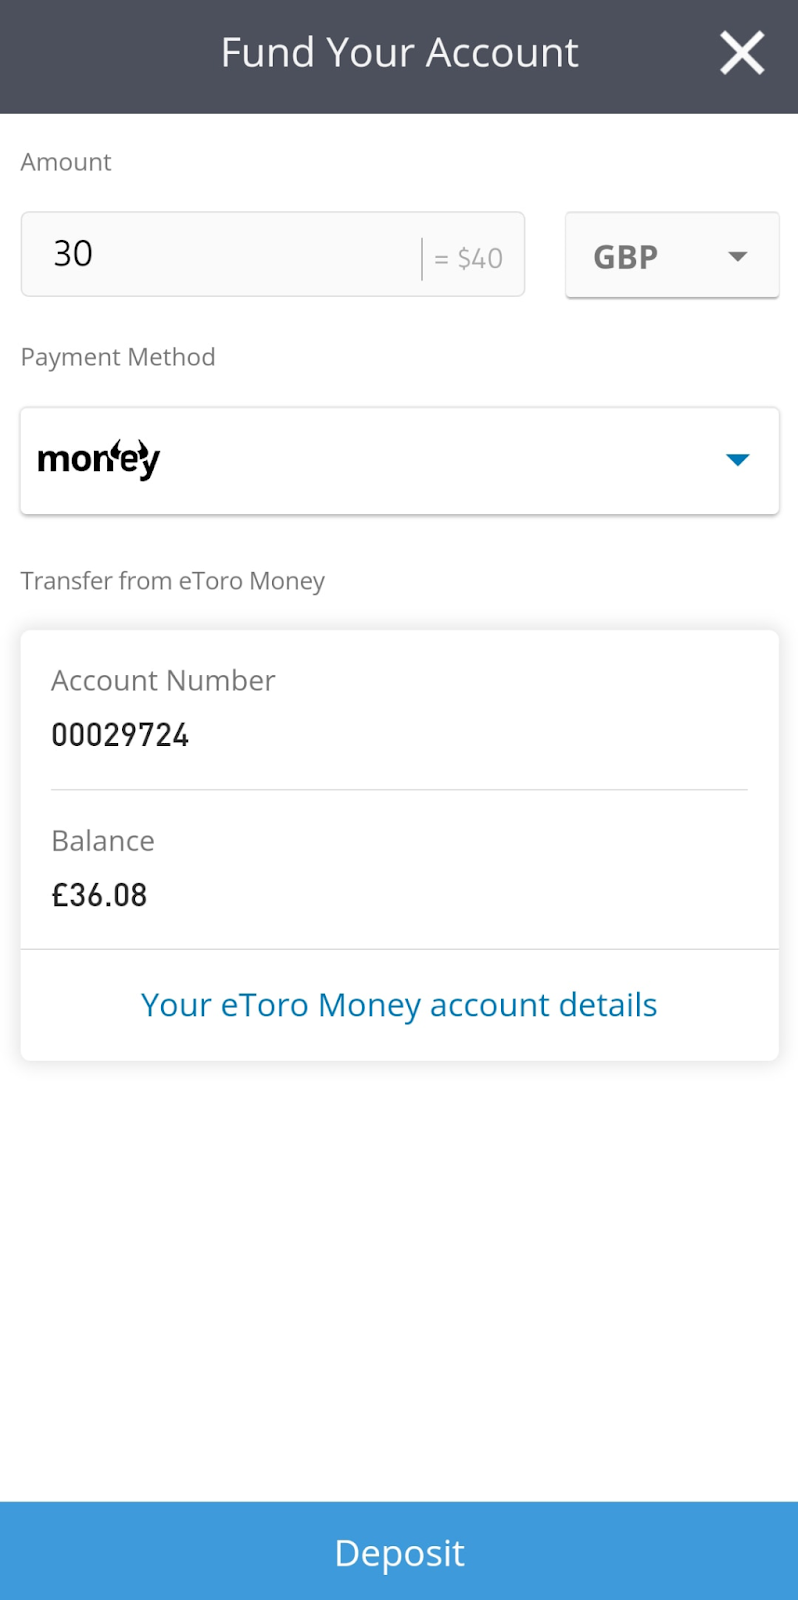 Buy Ethereum Using eToro And Know If It's Worth The Investment 